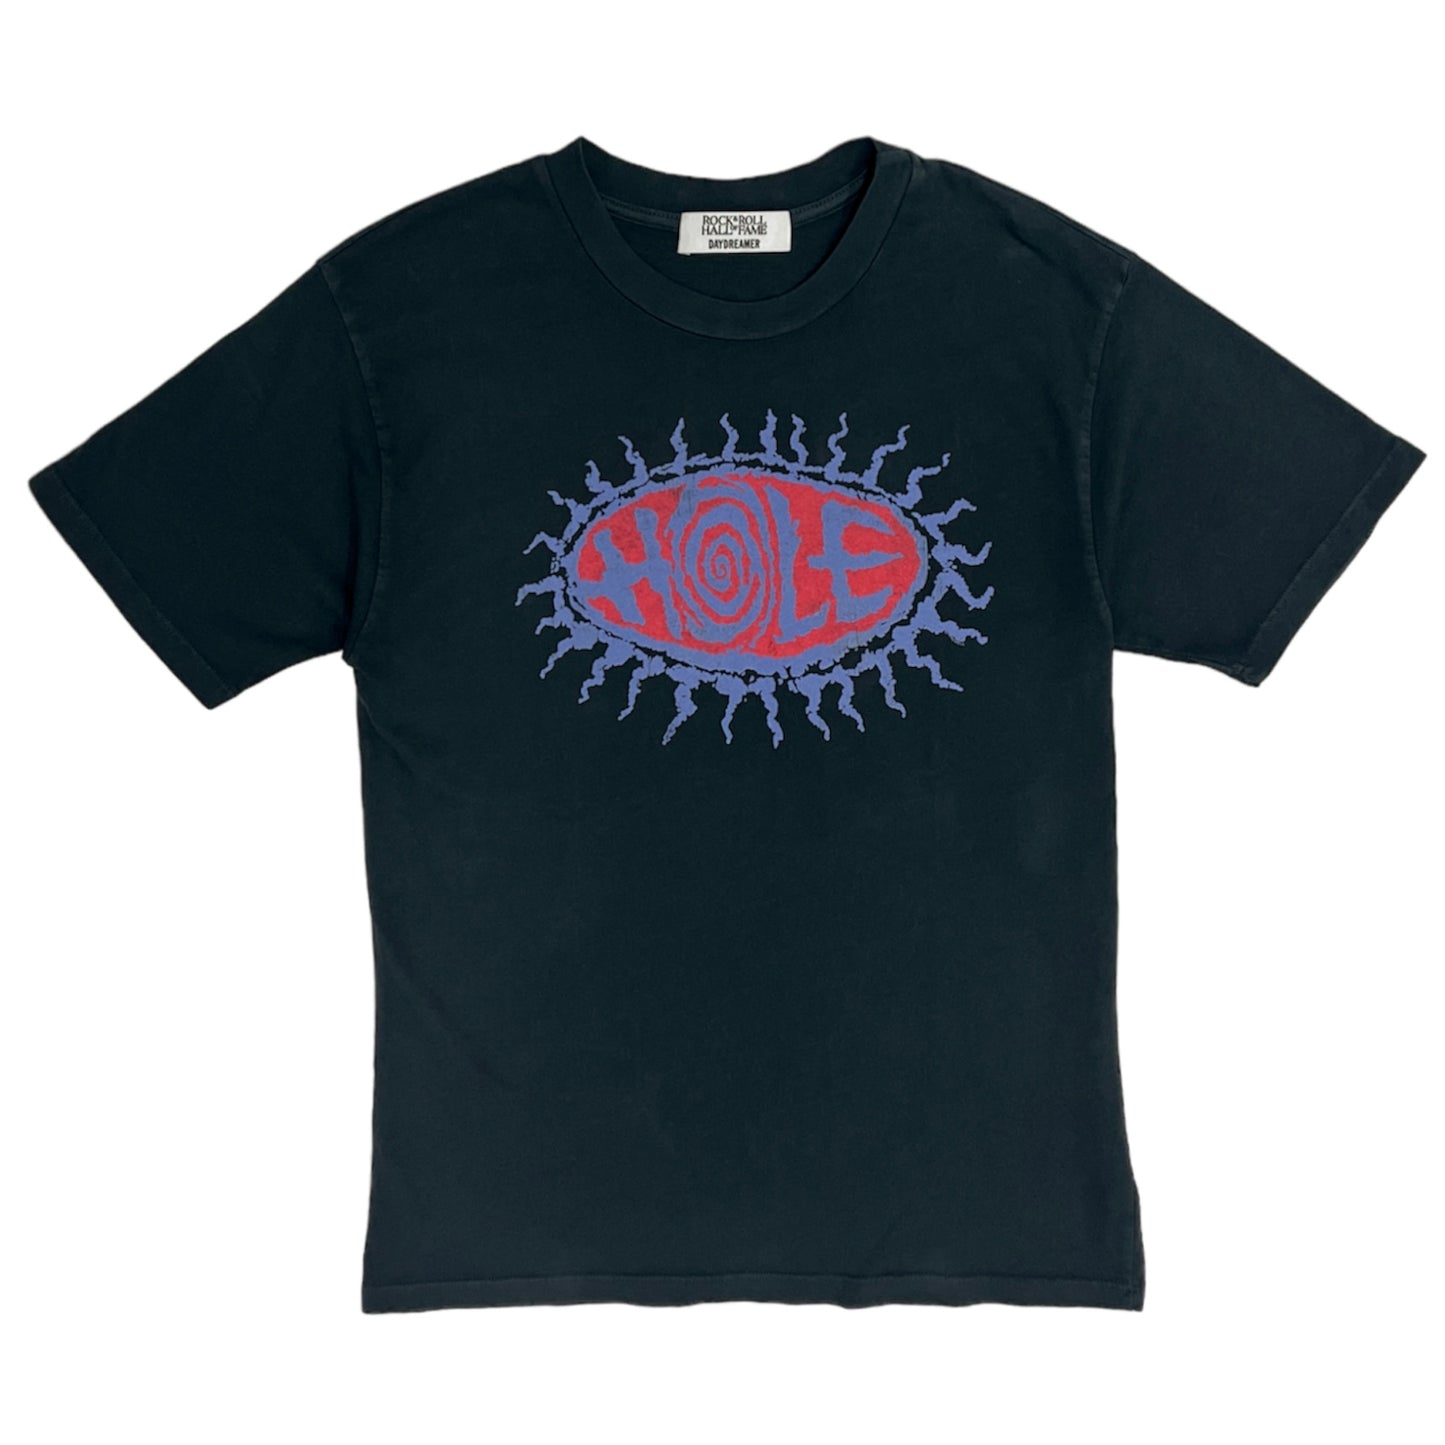 ROCK HALL X DAYDREAMER - EXCLUSIVE HOLE T-SHIRT